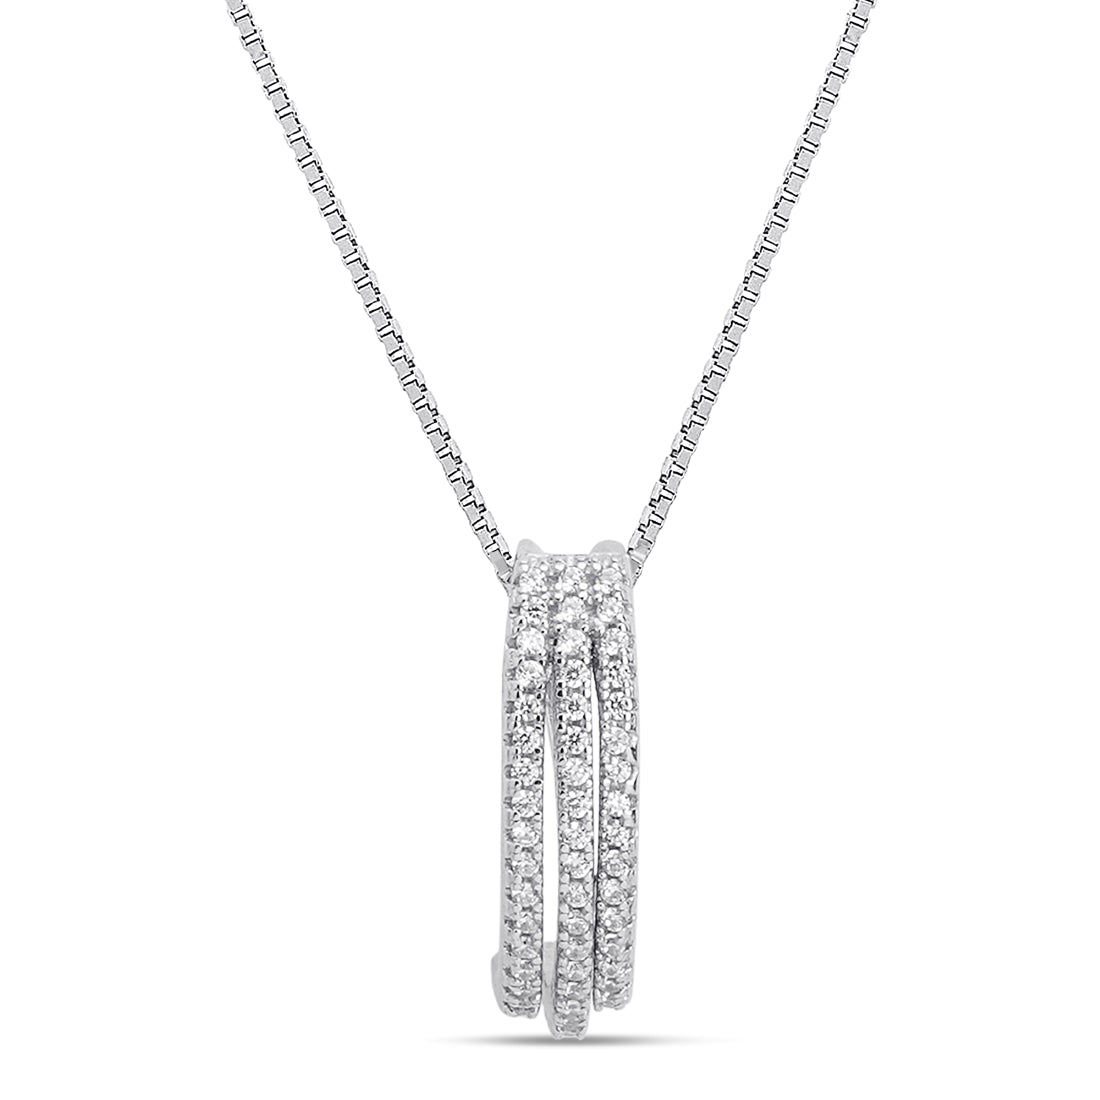 Abstract Brilliance Rhodium Plated 925 Sterling Silver Pendant